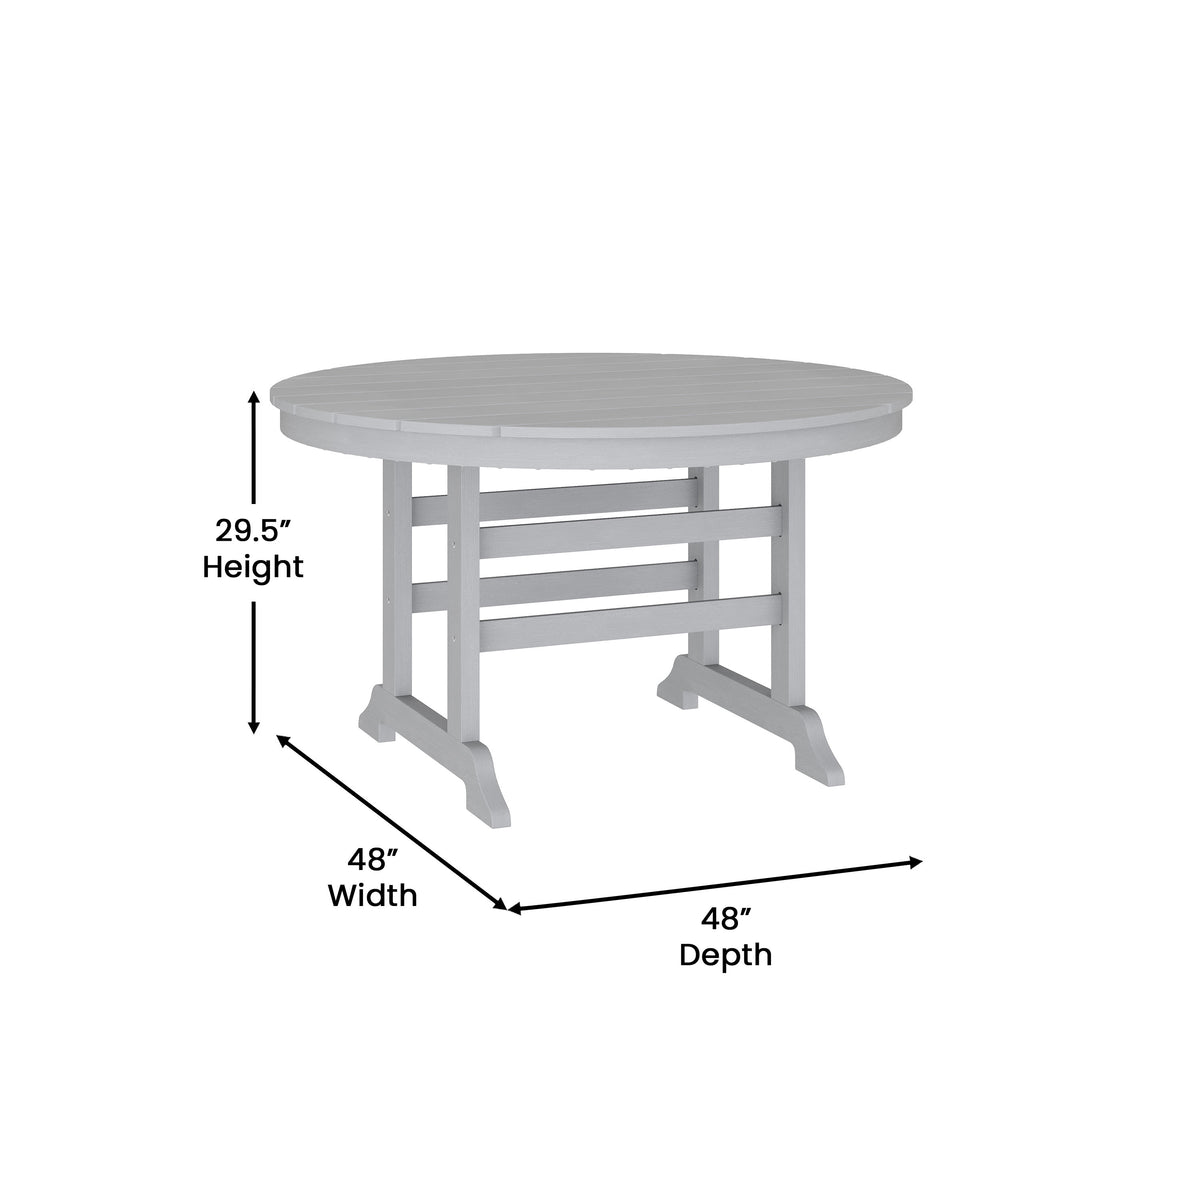 Gray |#| Commercial Grade Indoor-Outdoor 48" Round Adirondack Style Table in Black